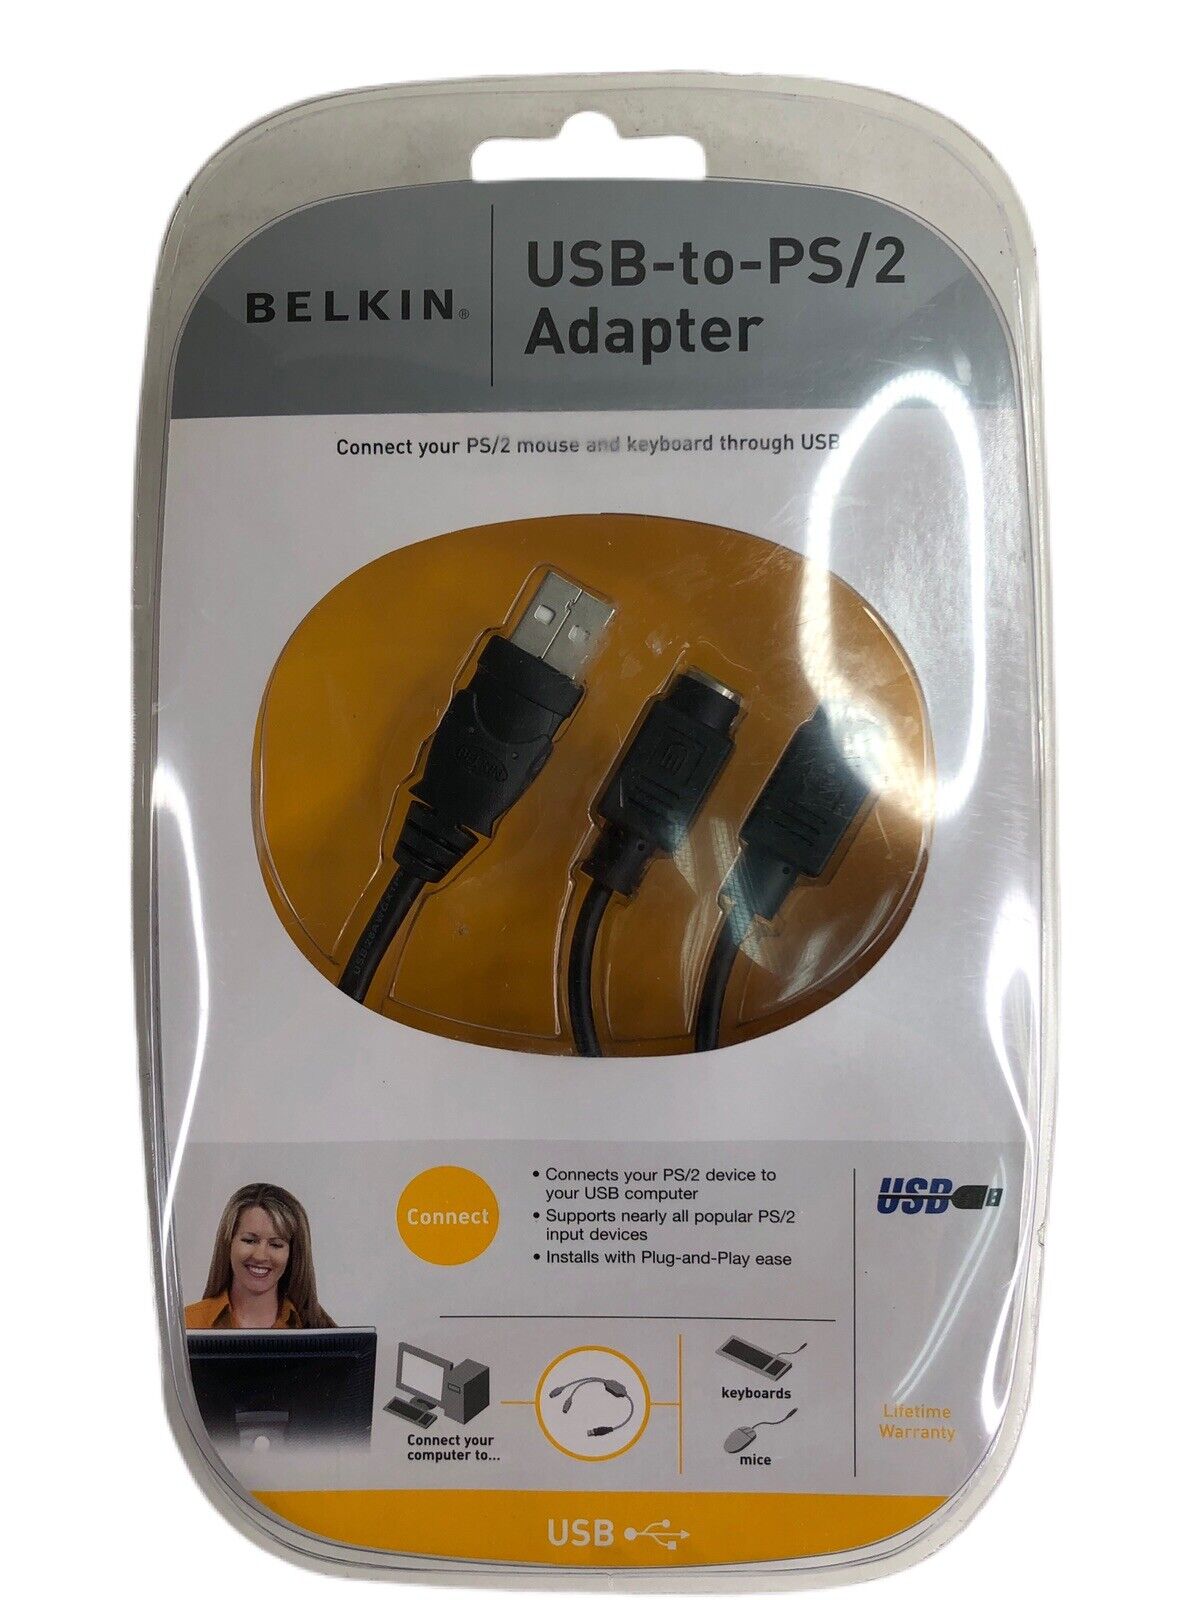 Belkin USB-to-PS/2 Adapter F5U119VE1 - Connect PS/2 Mouse & Keyboard USB